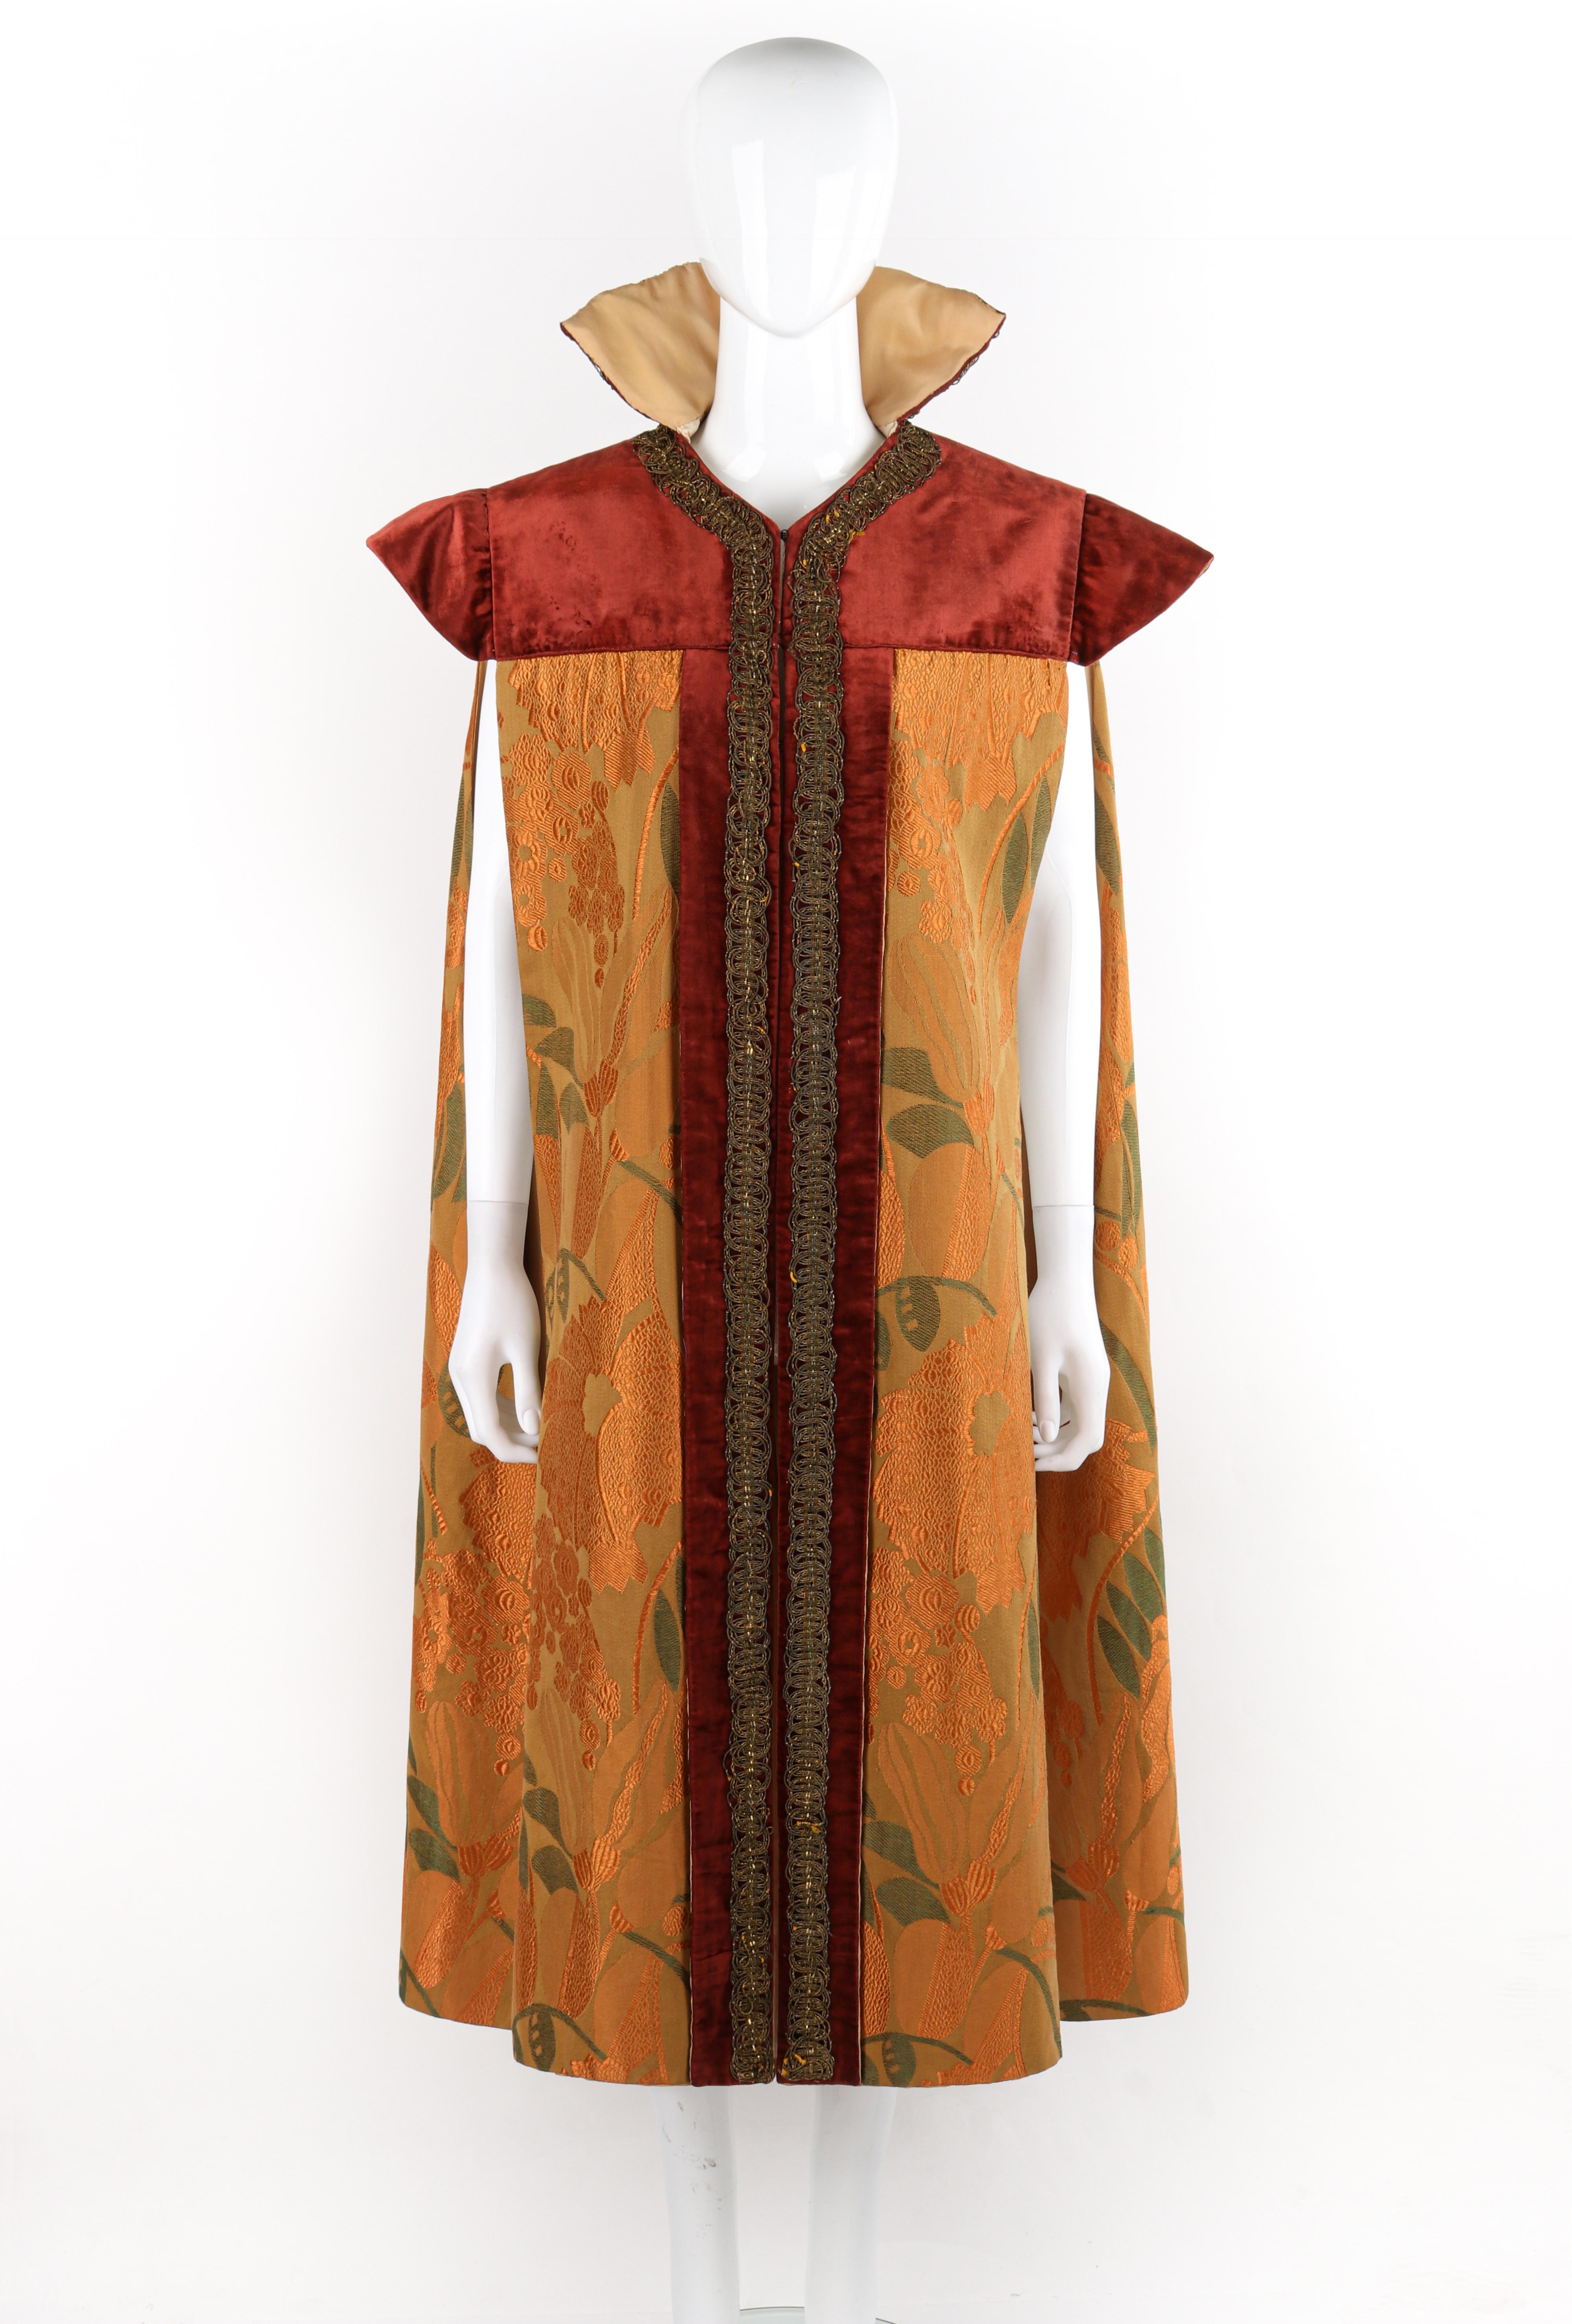 Circa: 1900s
Style: Cape
Color(s): Shades of orange, red, brown, green, gold
Lined: Yes
Unmarked Fabric Content (feel of): Velvet (top yoke), silk (primary fabric), metal (hardware), cording (trim)
Additional Details / Inclusions: Edwardian era